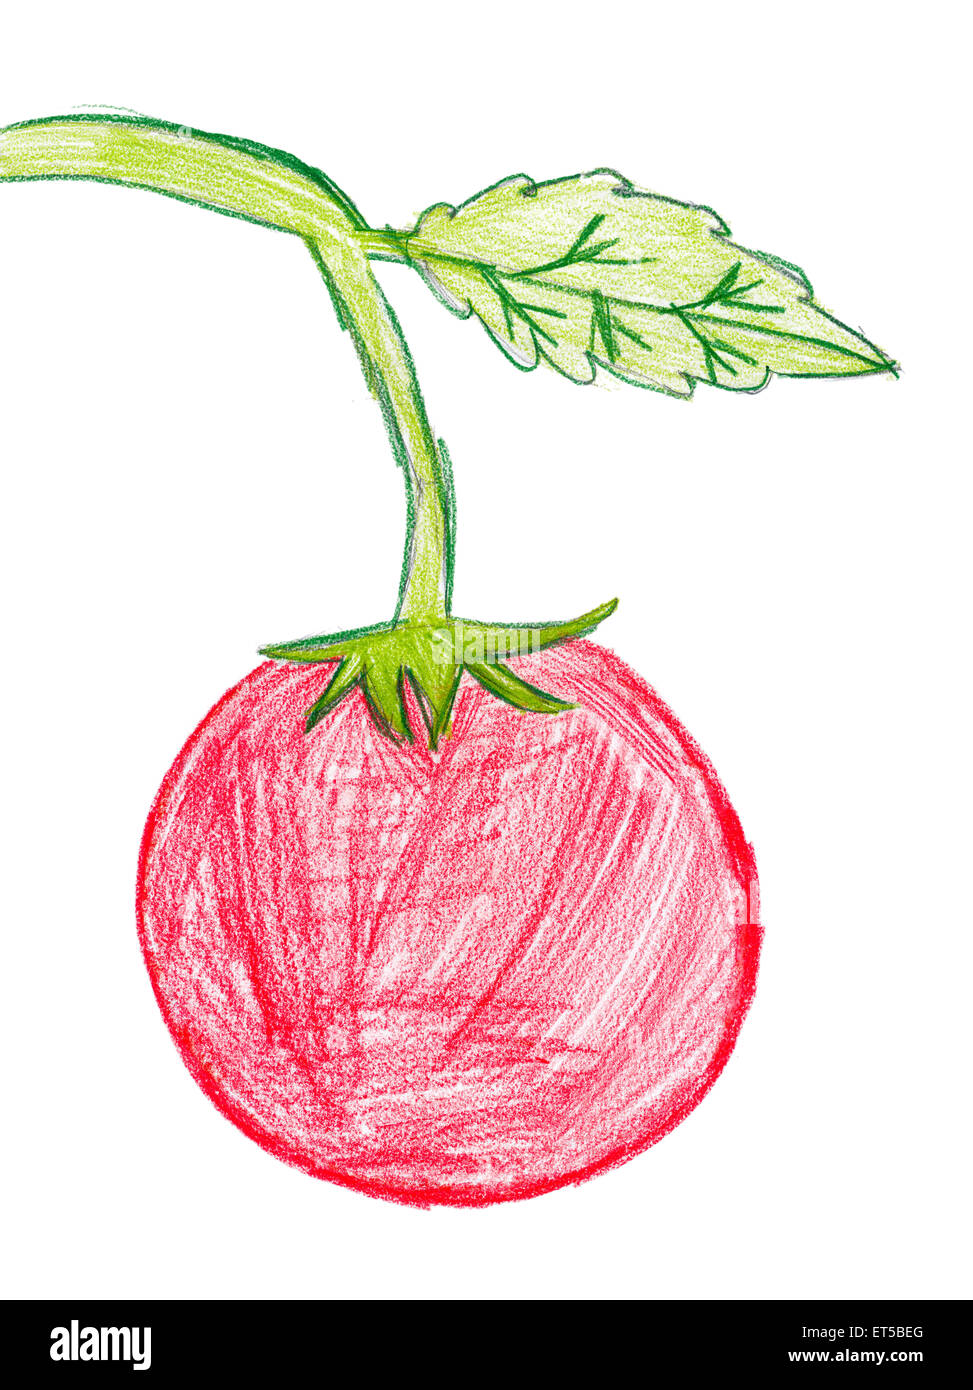 How to Draw a Tomato Step by Step  EasyLineDrawing